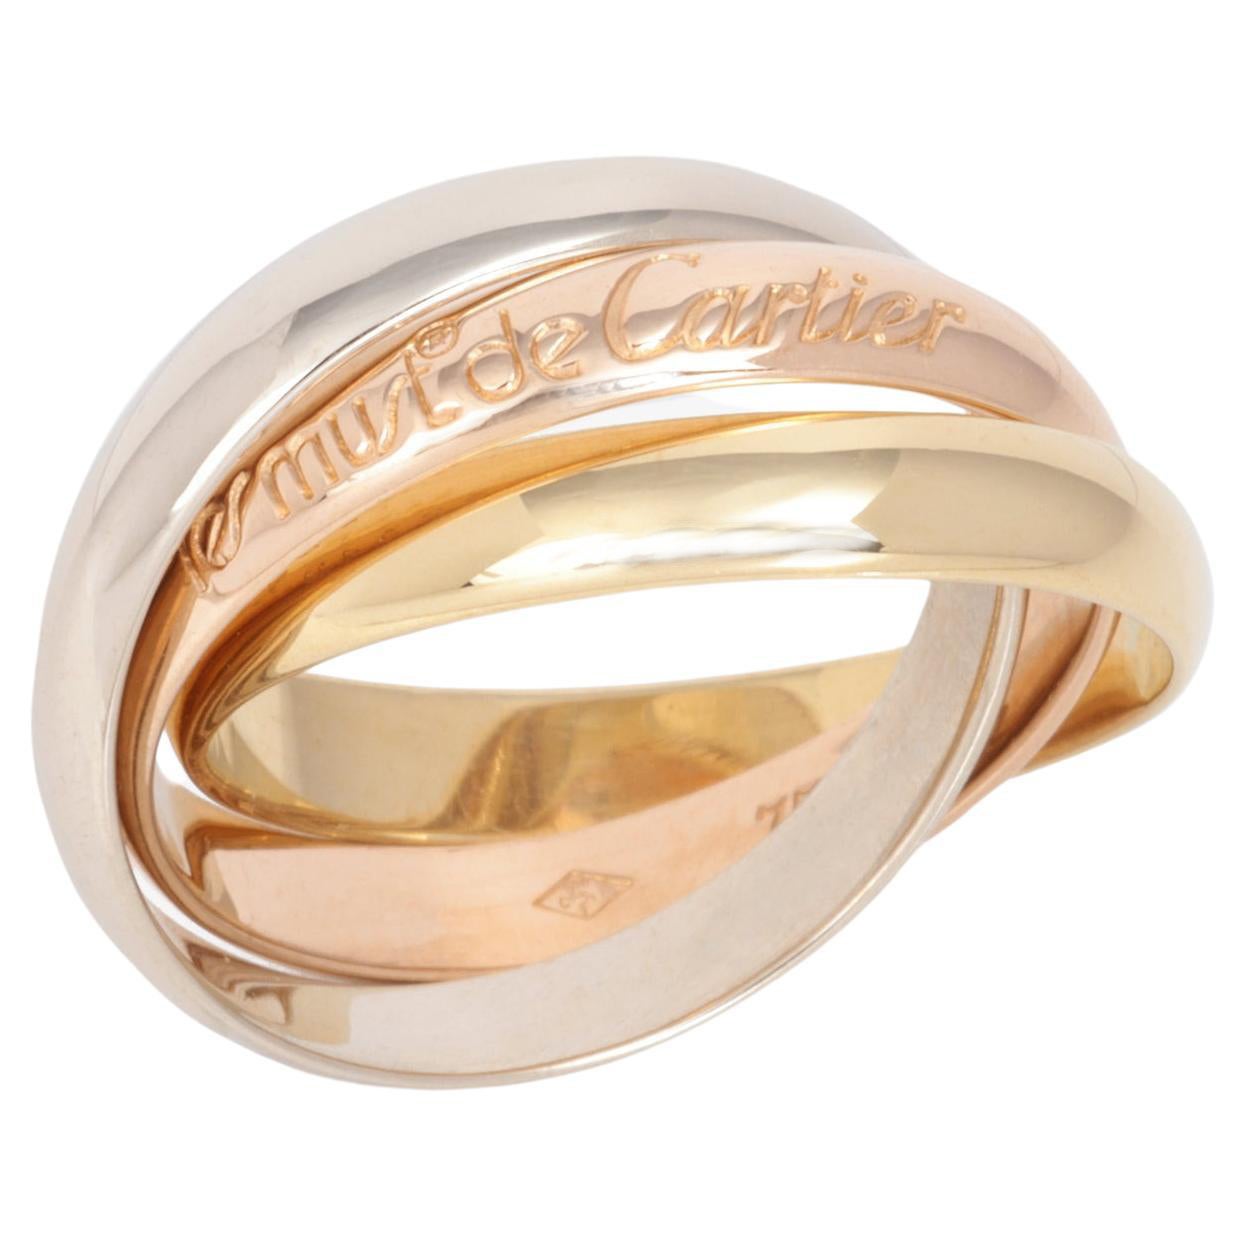 Cartier 18ct White, Yellow And Rose Gold Medium Les Must De Cartier Ring For Sale